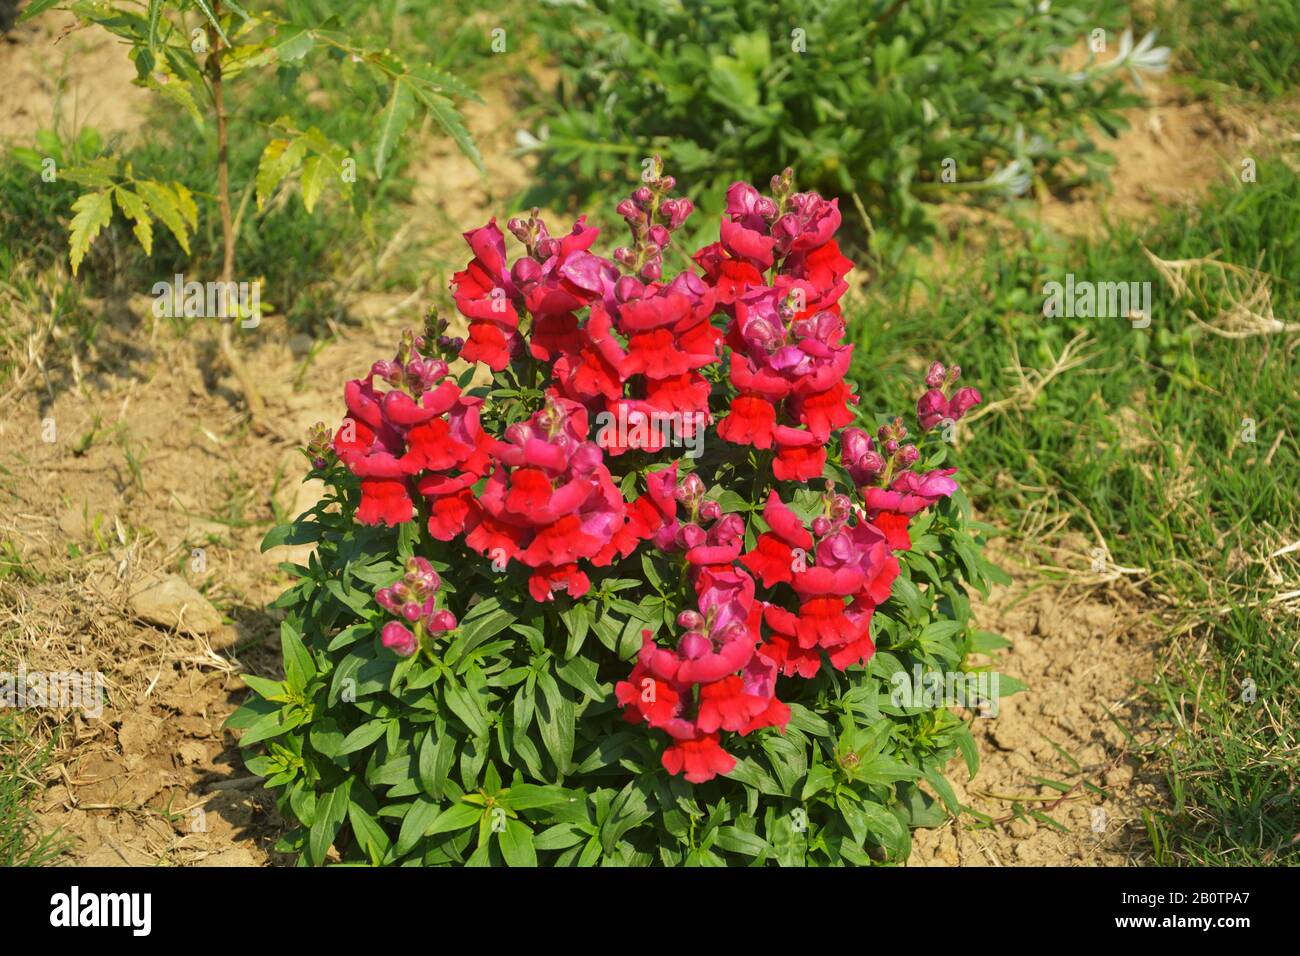 Close up of best annual flowers, red antirrhinum majus,  flowers, commom snapdragon flowering plants growing in garden, selective focusing Stock Photo